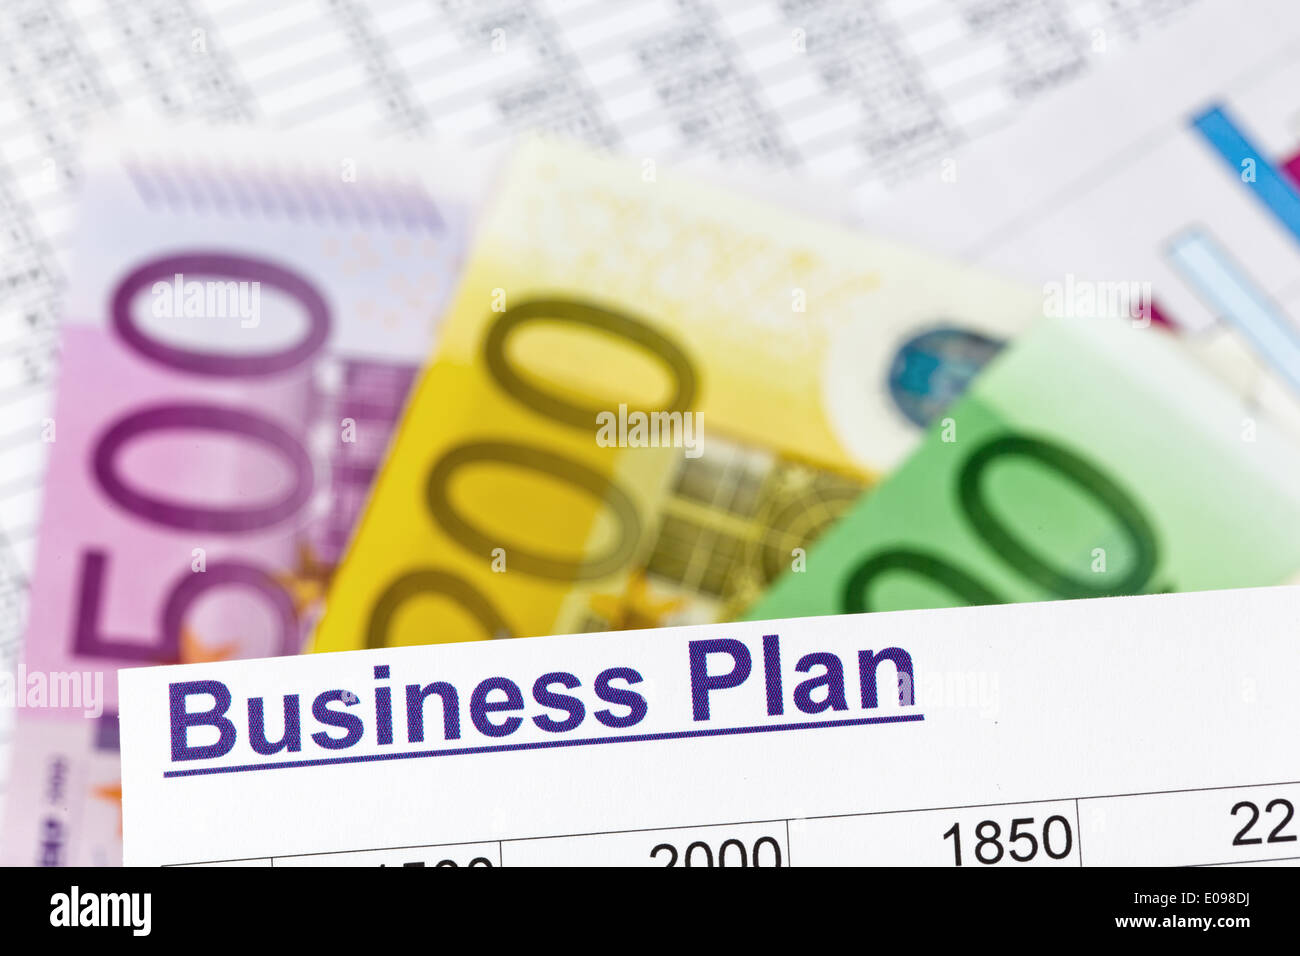 A business plan Stock Photo